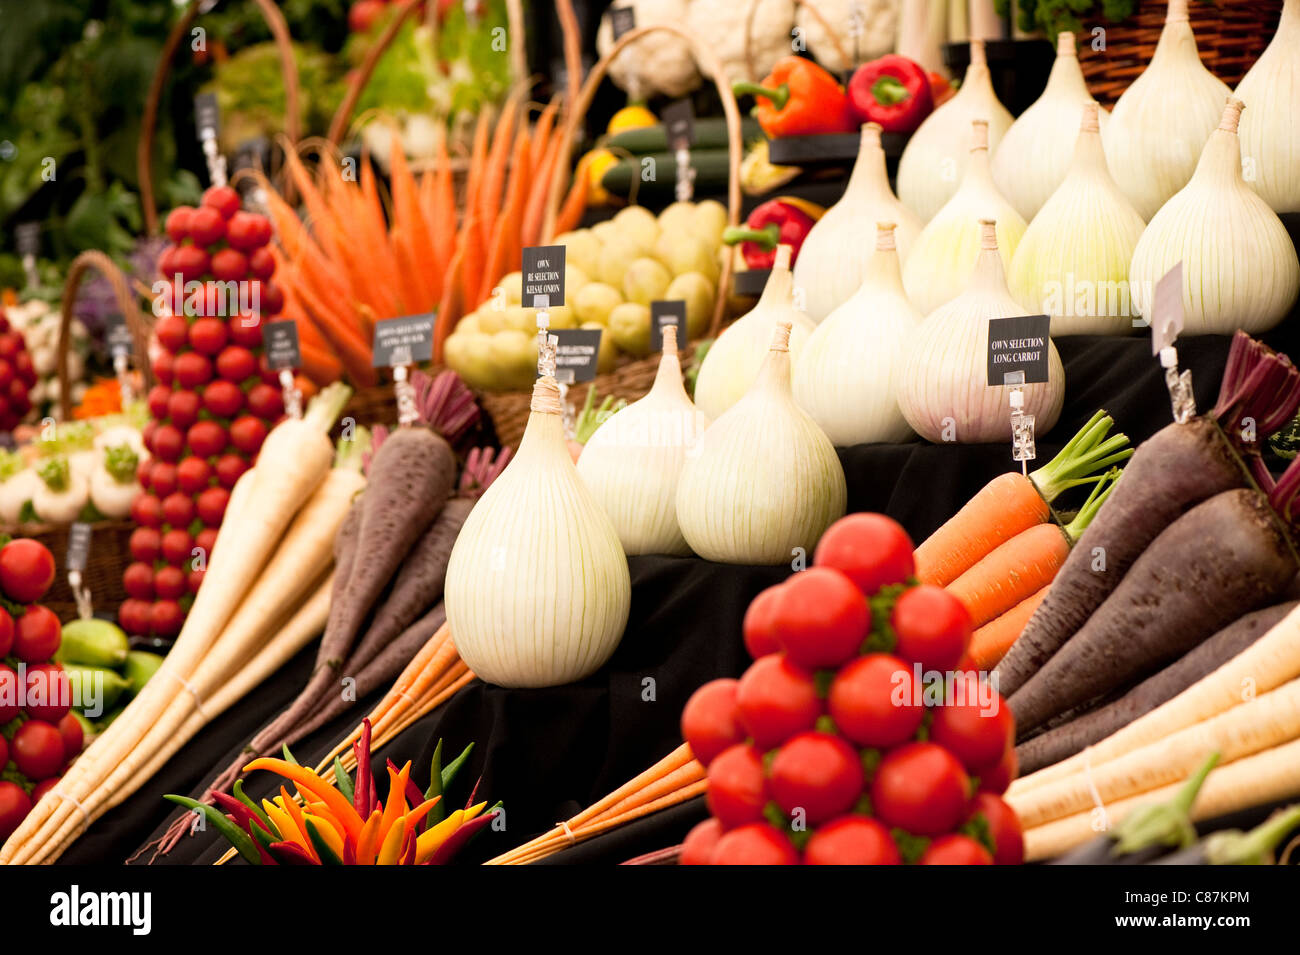 Stand displaying different varieties of vegetable at 2011 RHS Flower Show Tatton Park Stock Photo